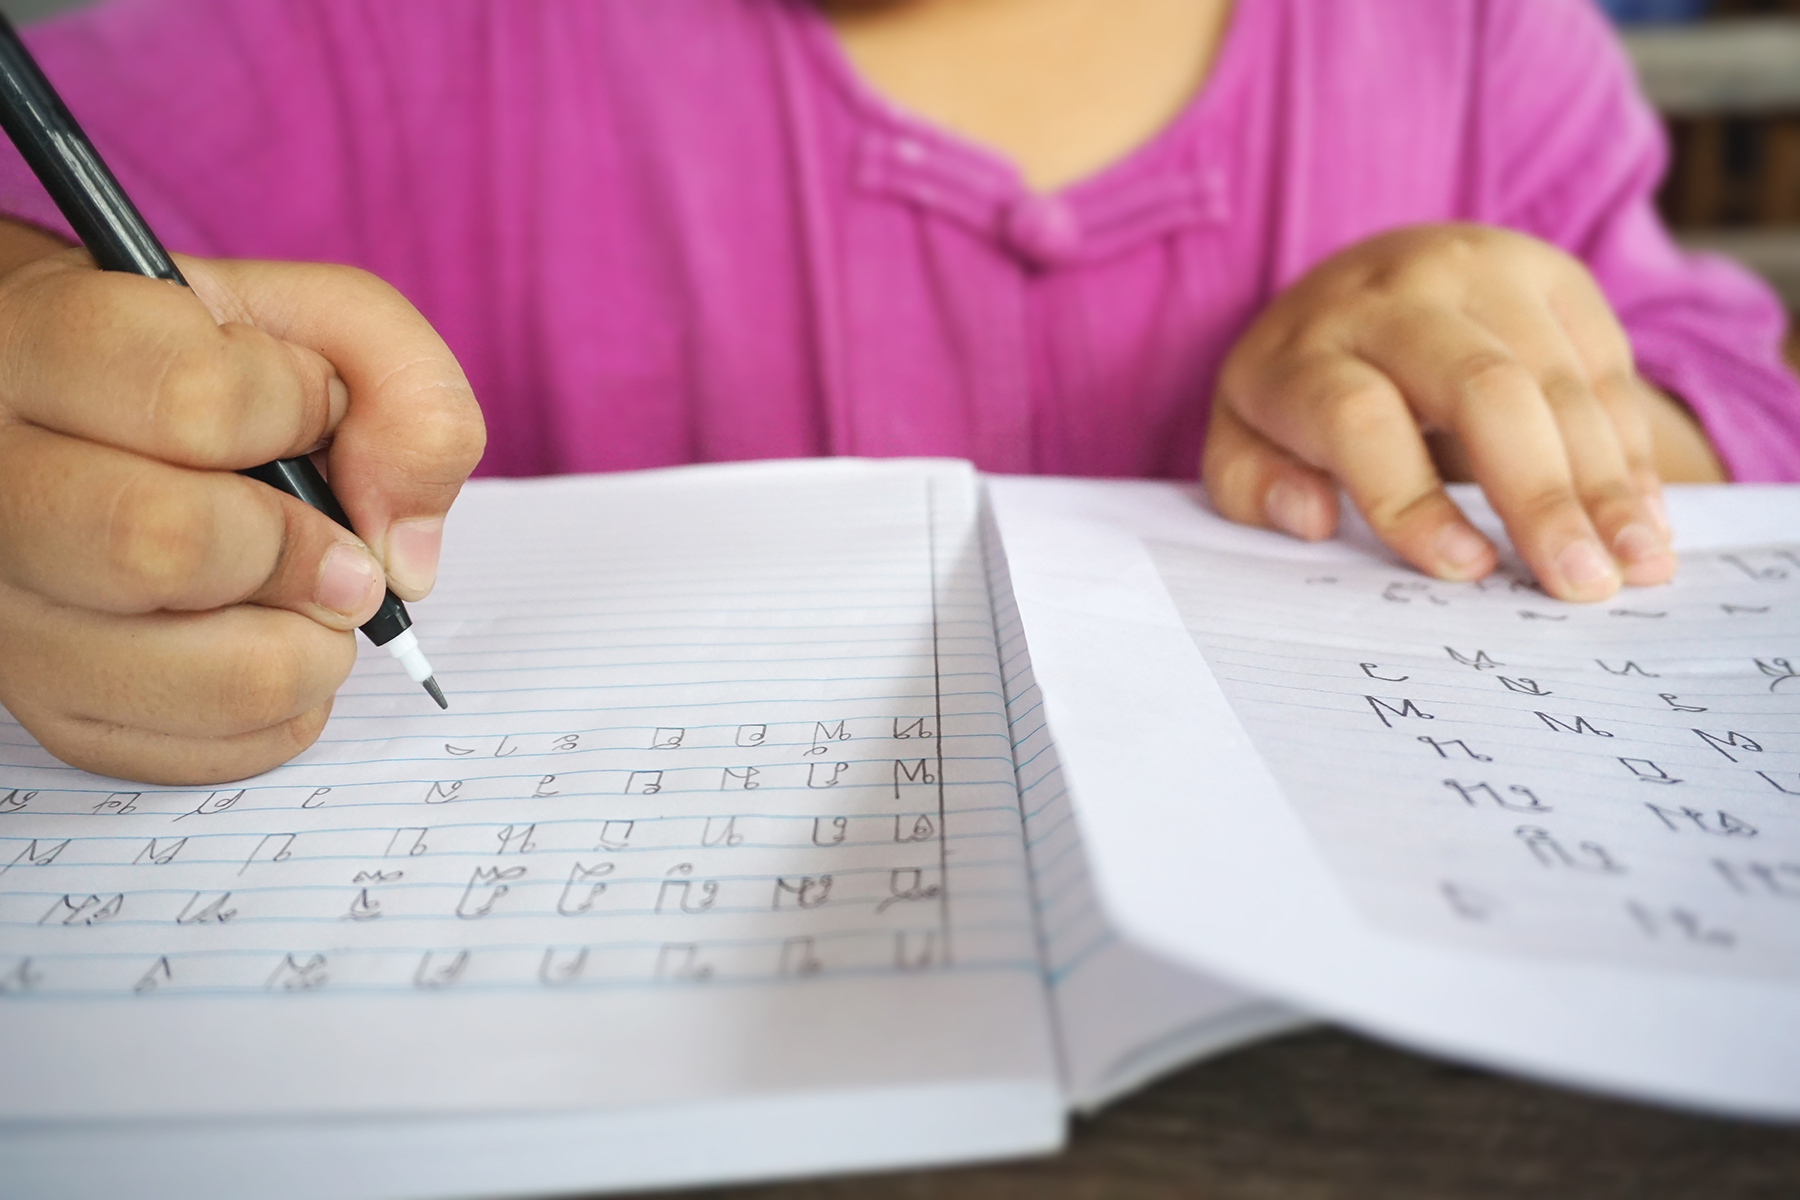 Closeup of a child writing Thai characters in a notebook